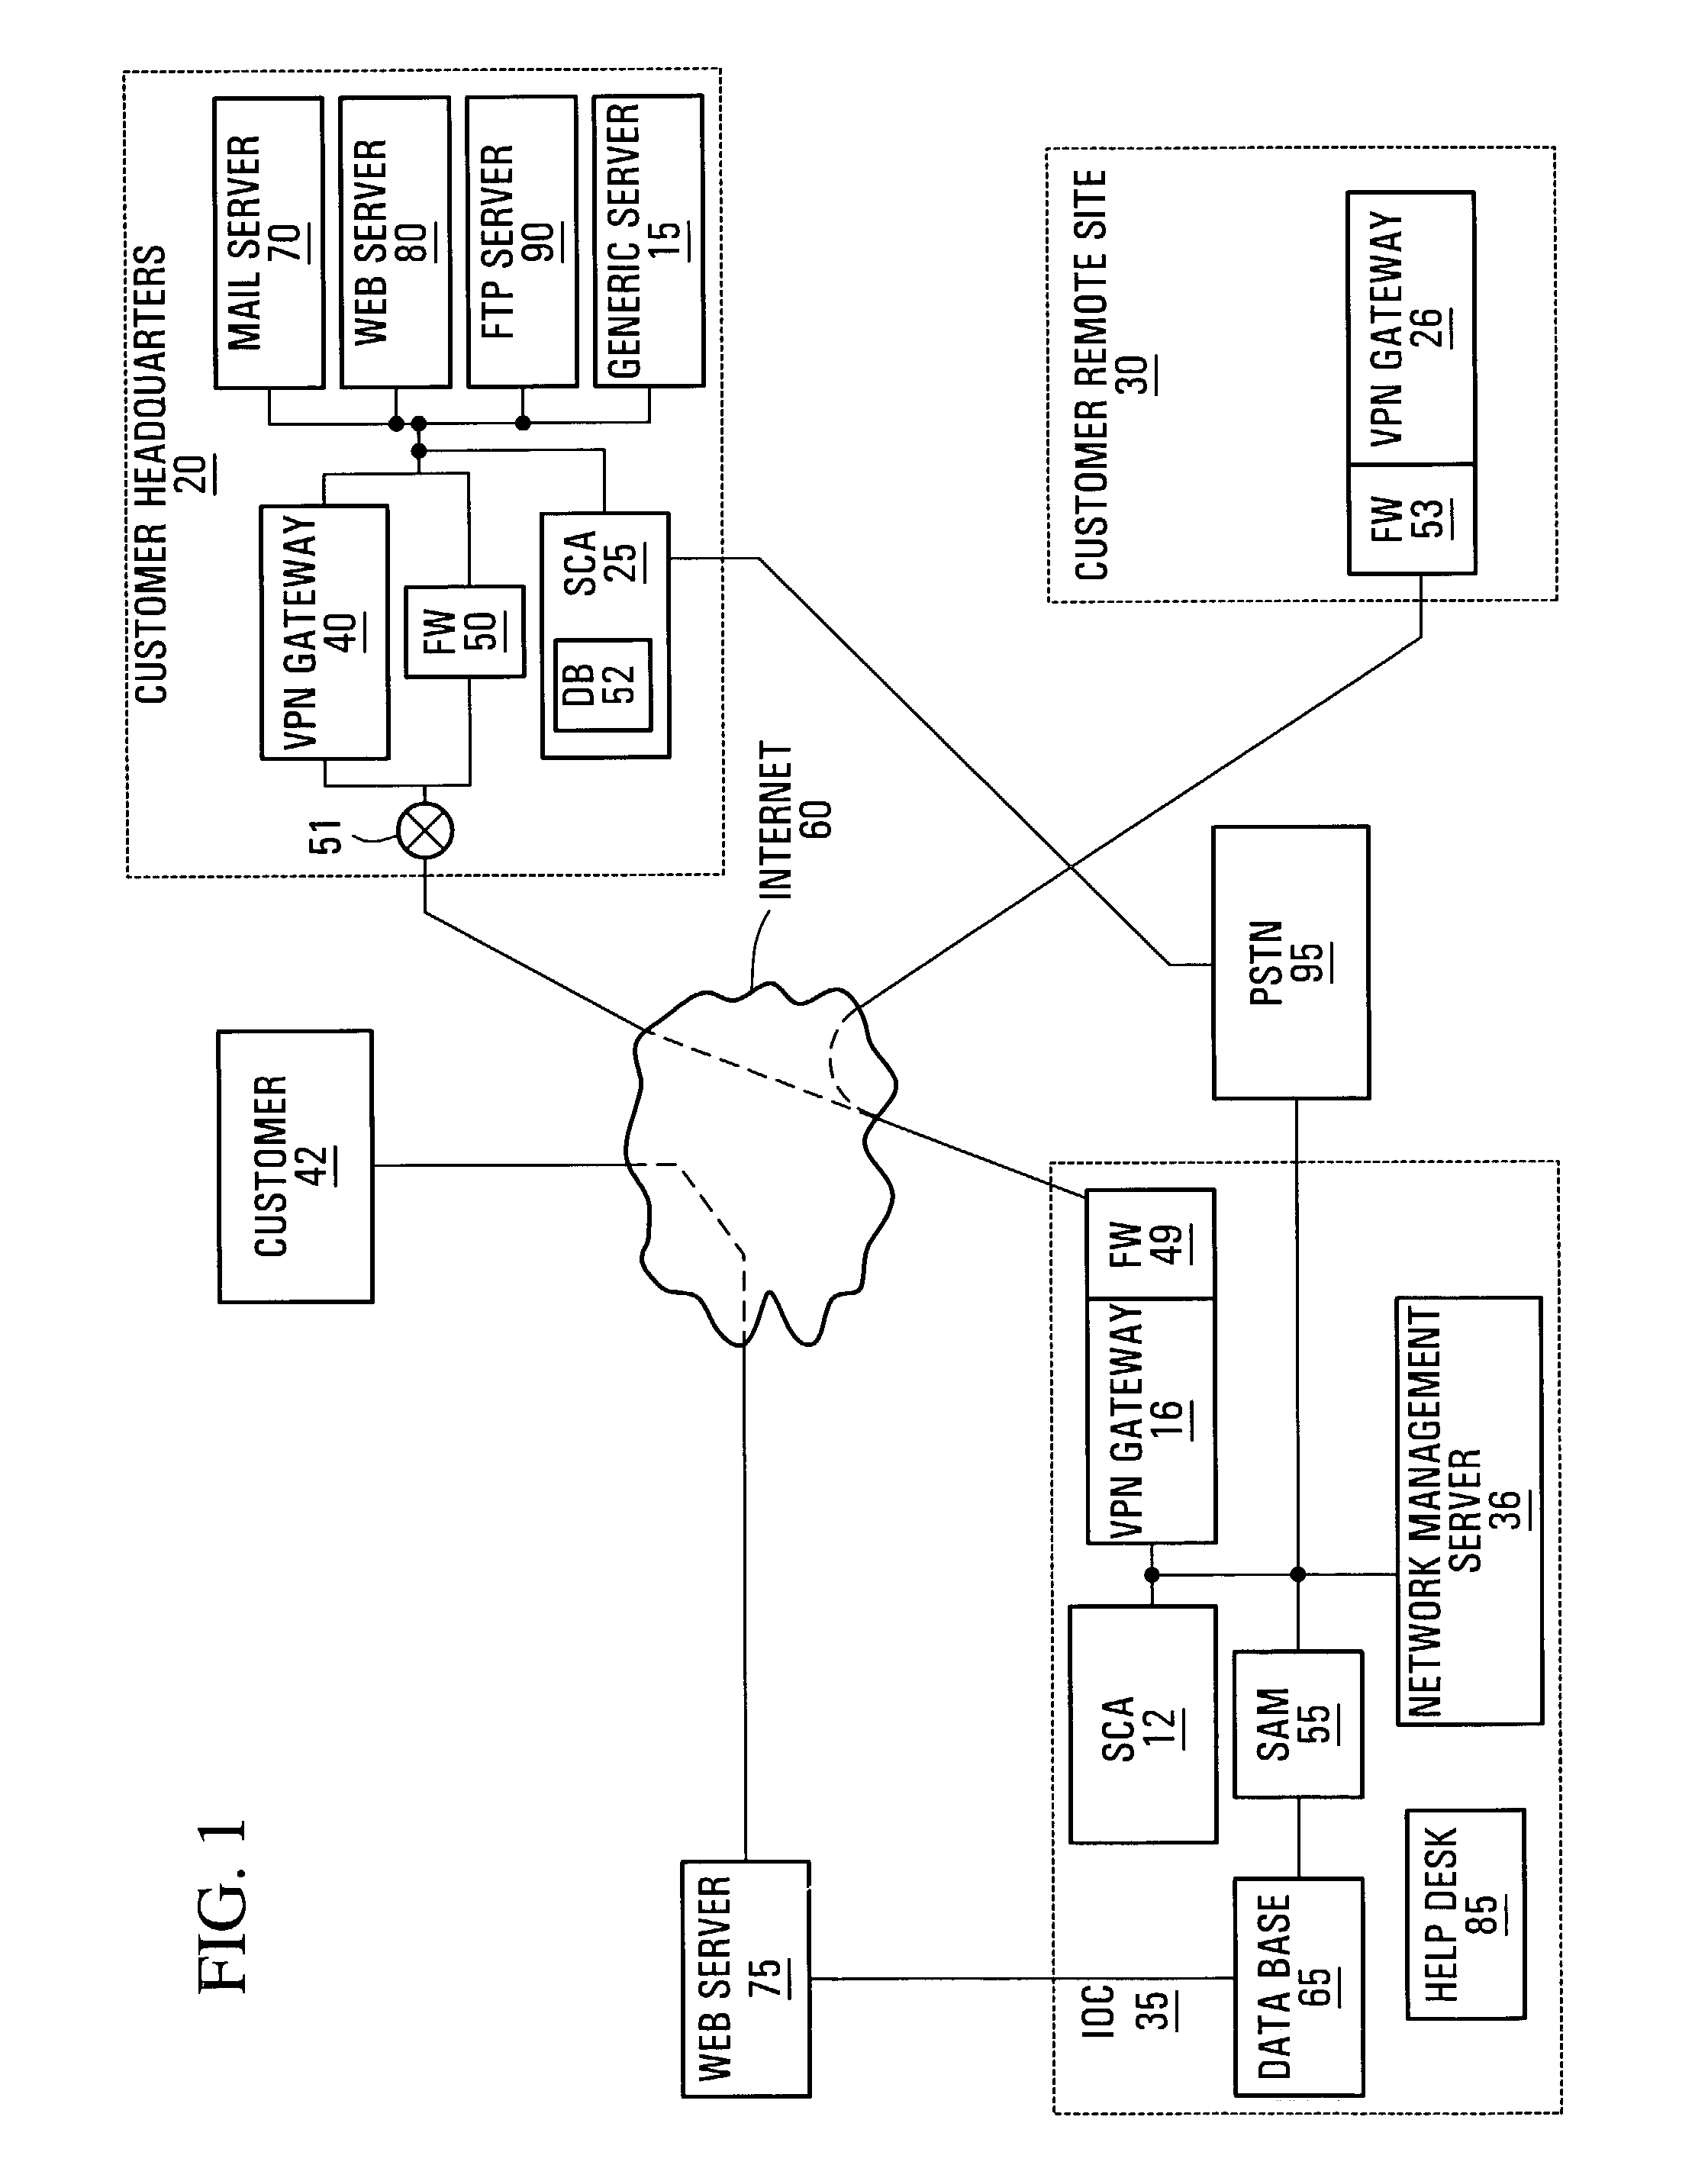 Method and apparatus for secure distributed managed network information services with redundancy